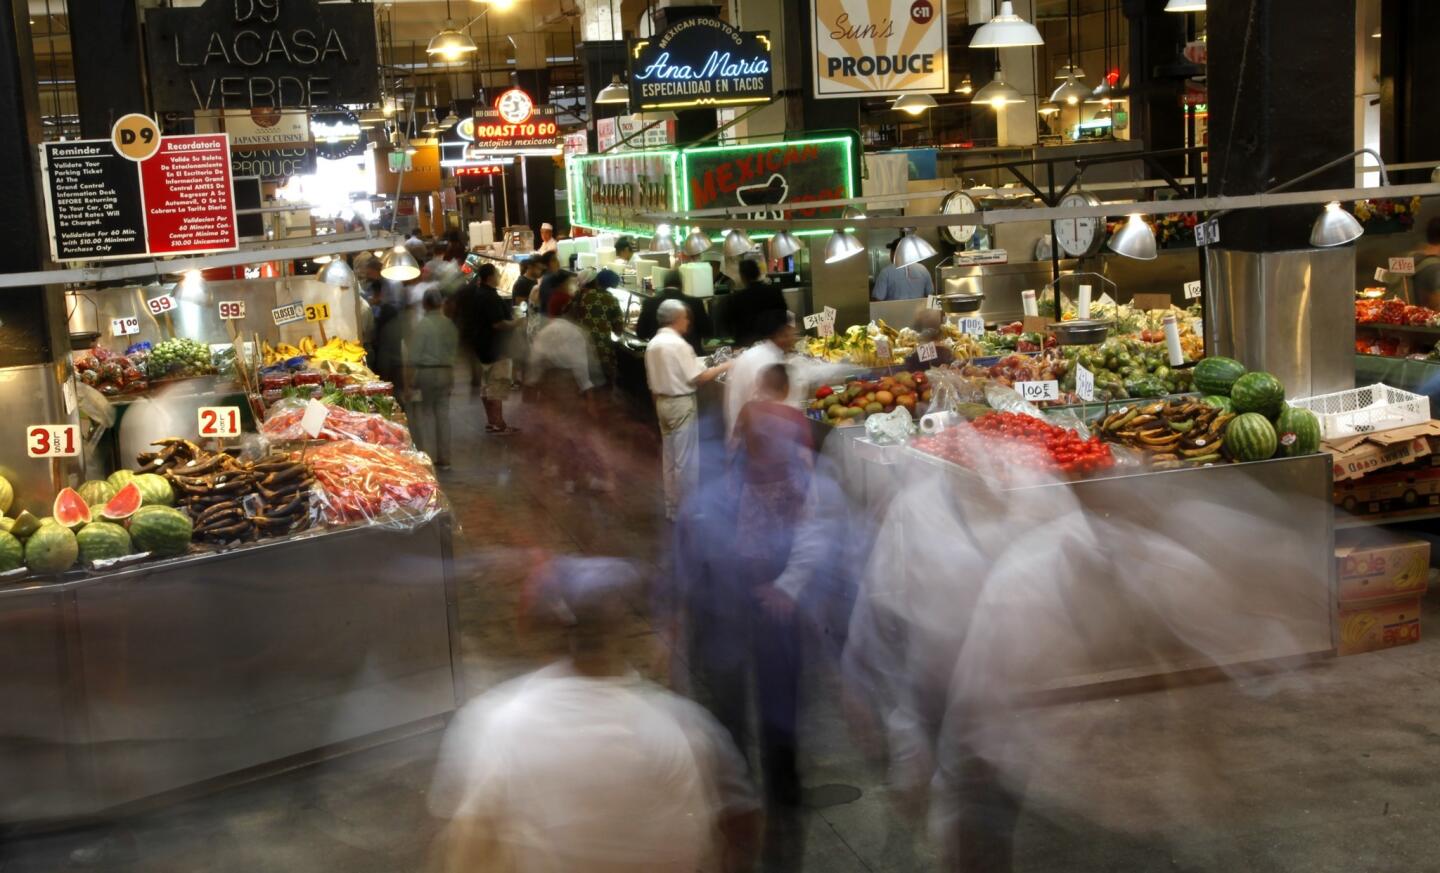 Activity and foot traffic peaks during lunchtime at Grand Central Market in downtown Los Angeles, where the food and a mix of new vendors with more upscale offerings are bound to make it even more crowded.